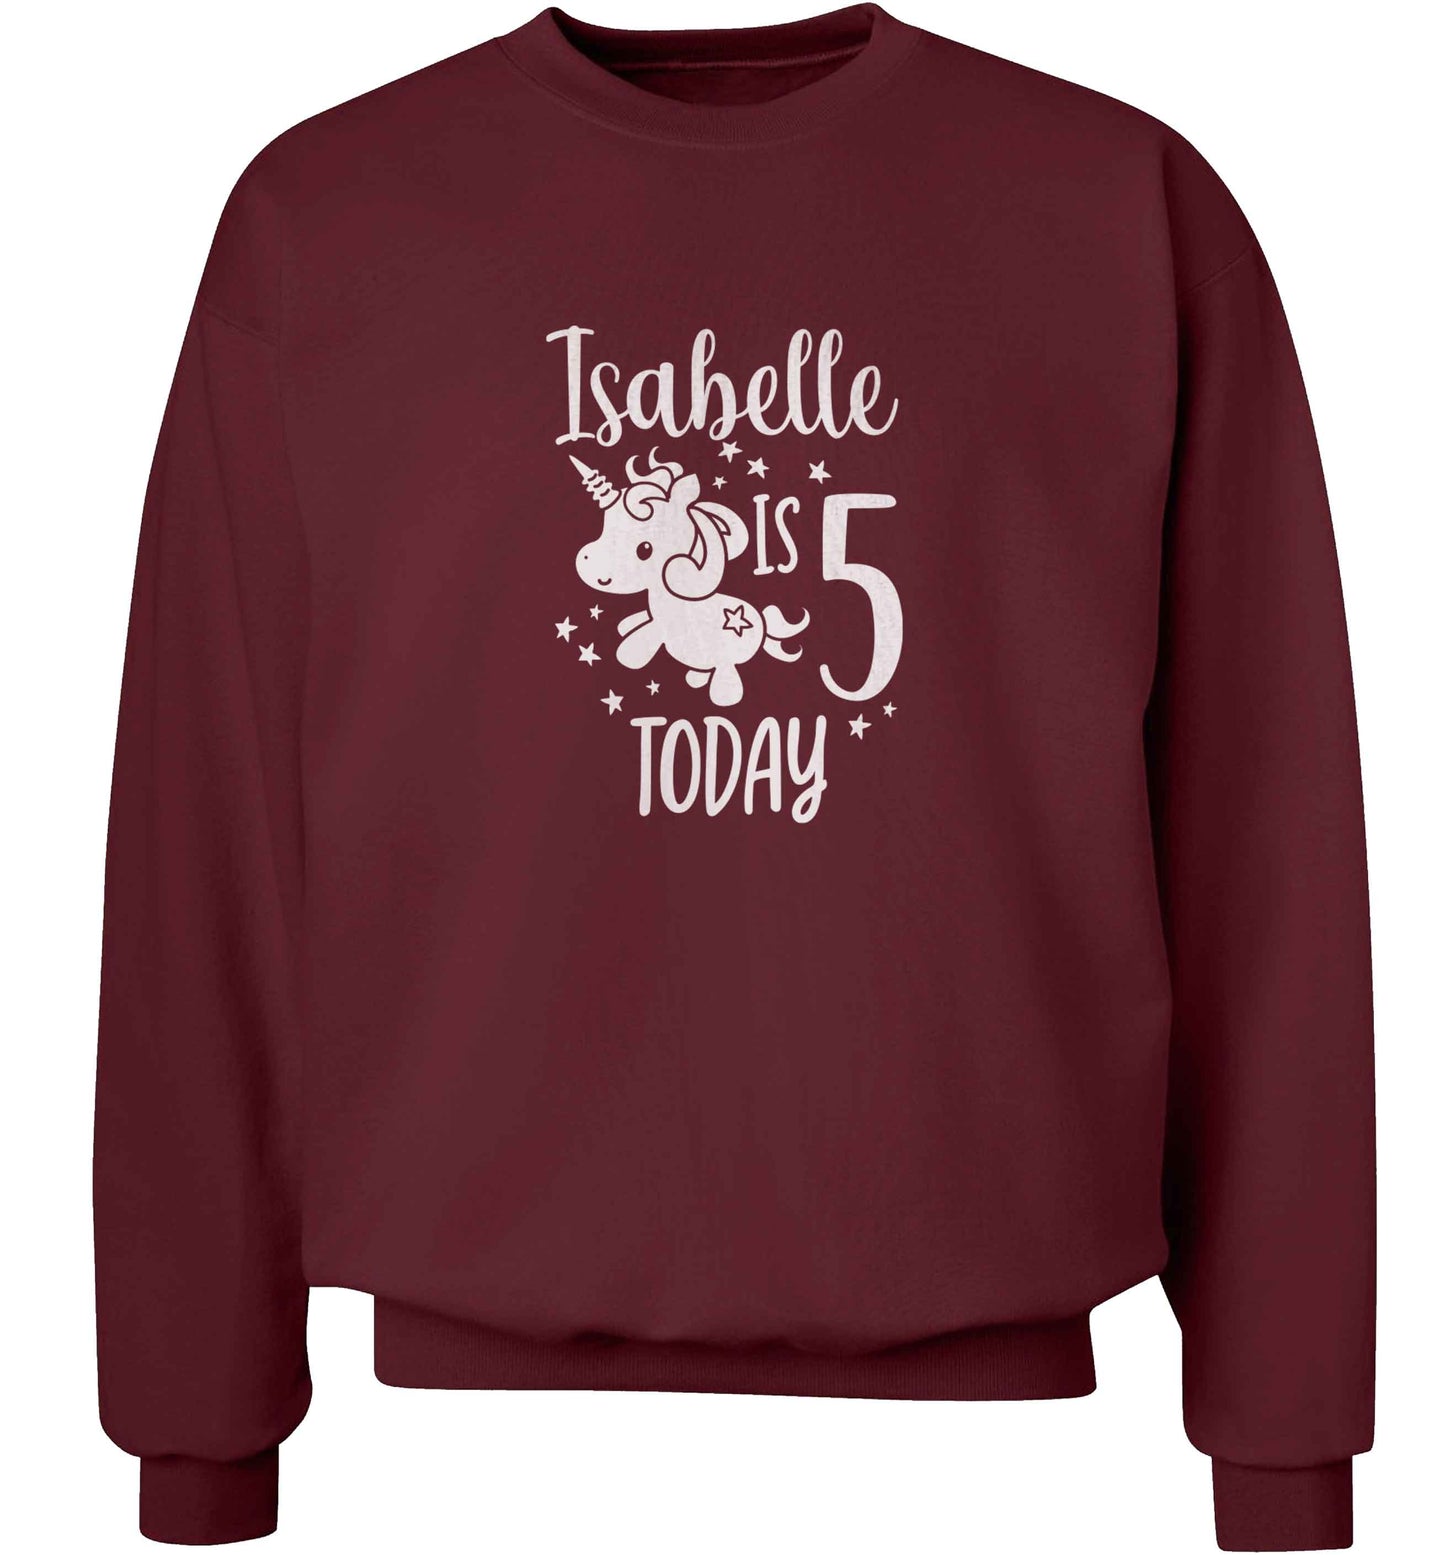 Today I am - Personalise with any name or age! Birthday unicorn adult's unisex maroon sweater 2XL